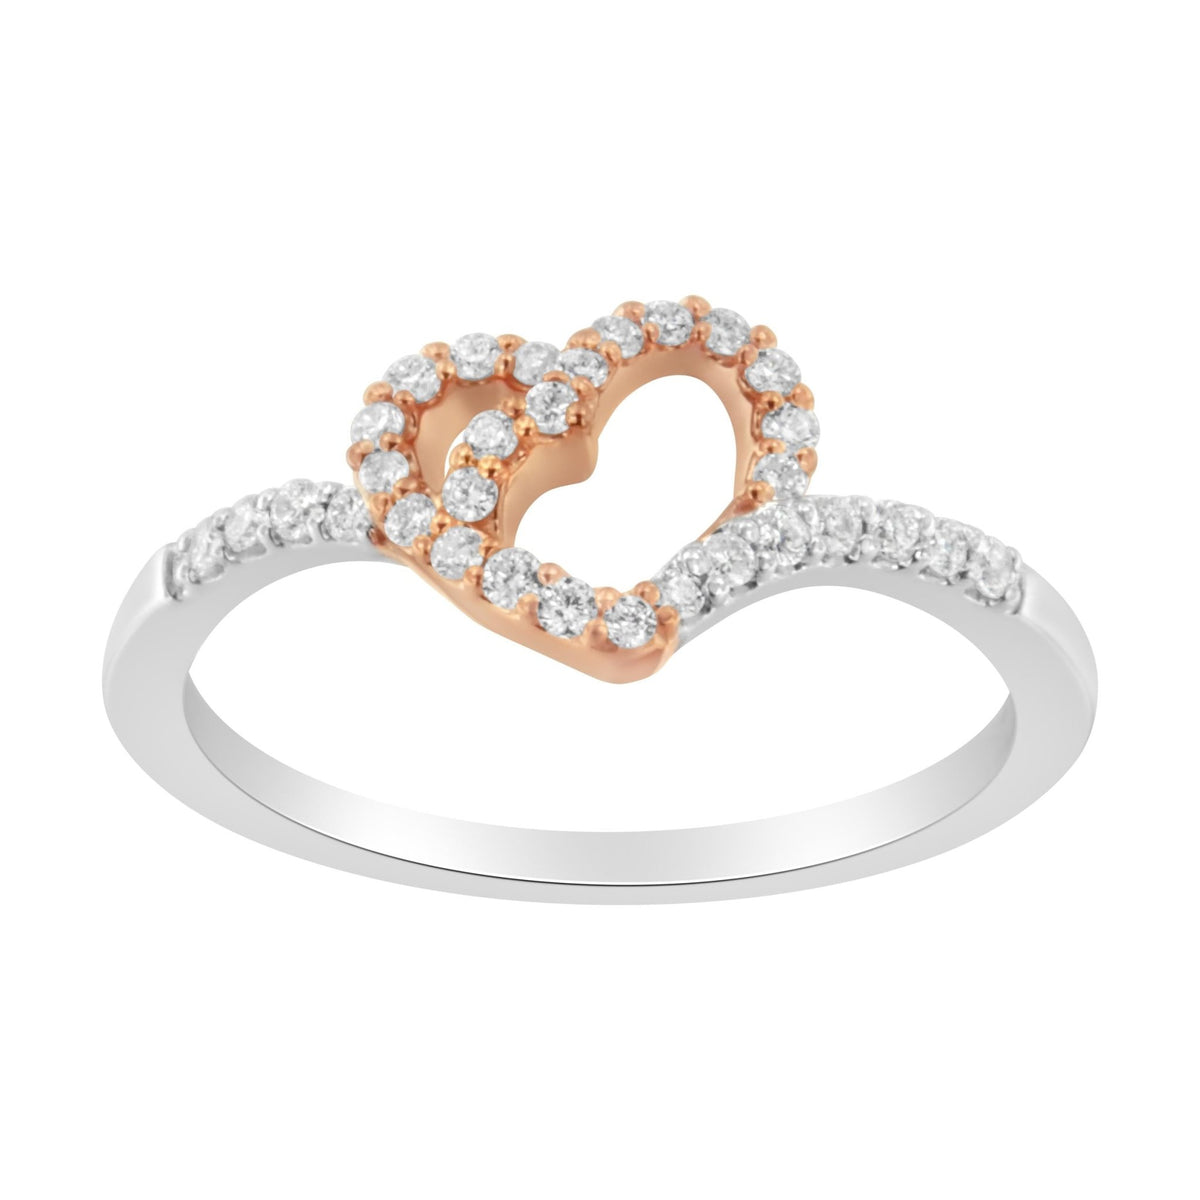 10K Rose Gold over .925 Sterling Silver 1/5 Cttw Diamond Two Tone Open Heart Promise or Fashion Ring (I-J Color, I2-I3 Clarity) - Size 6 - LinkagejewelrydesignLinkagejewelrydesign